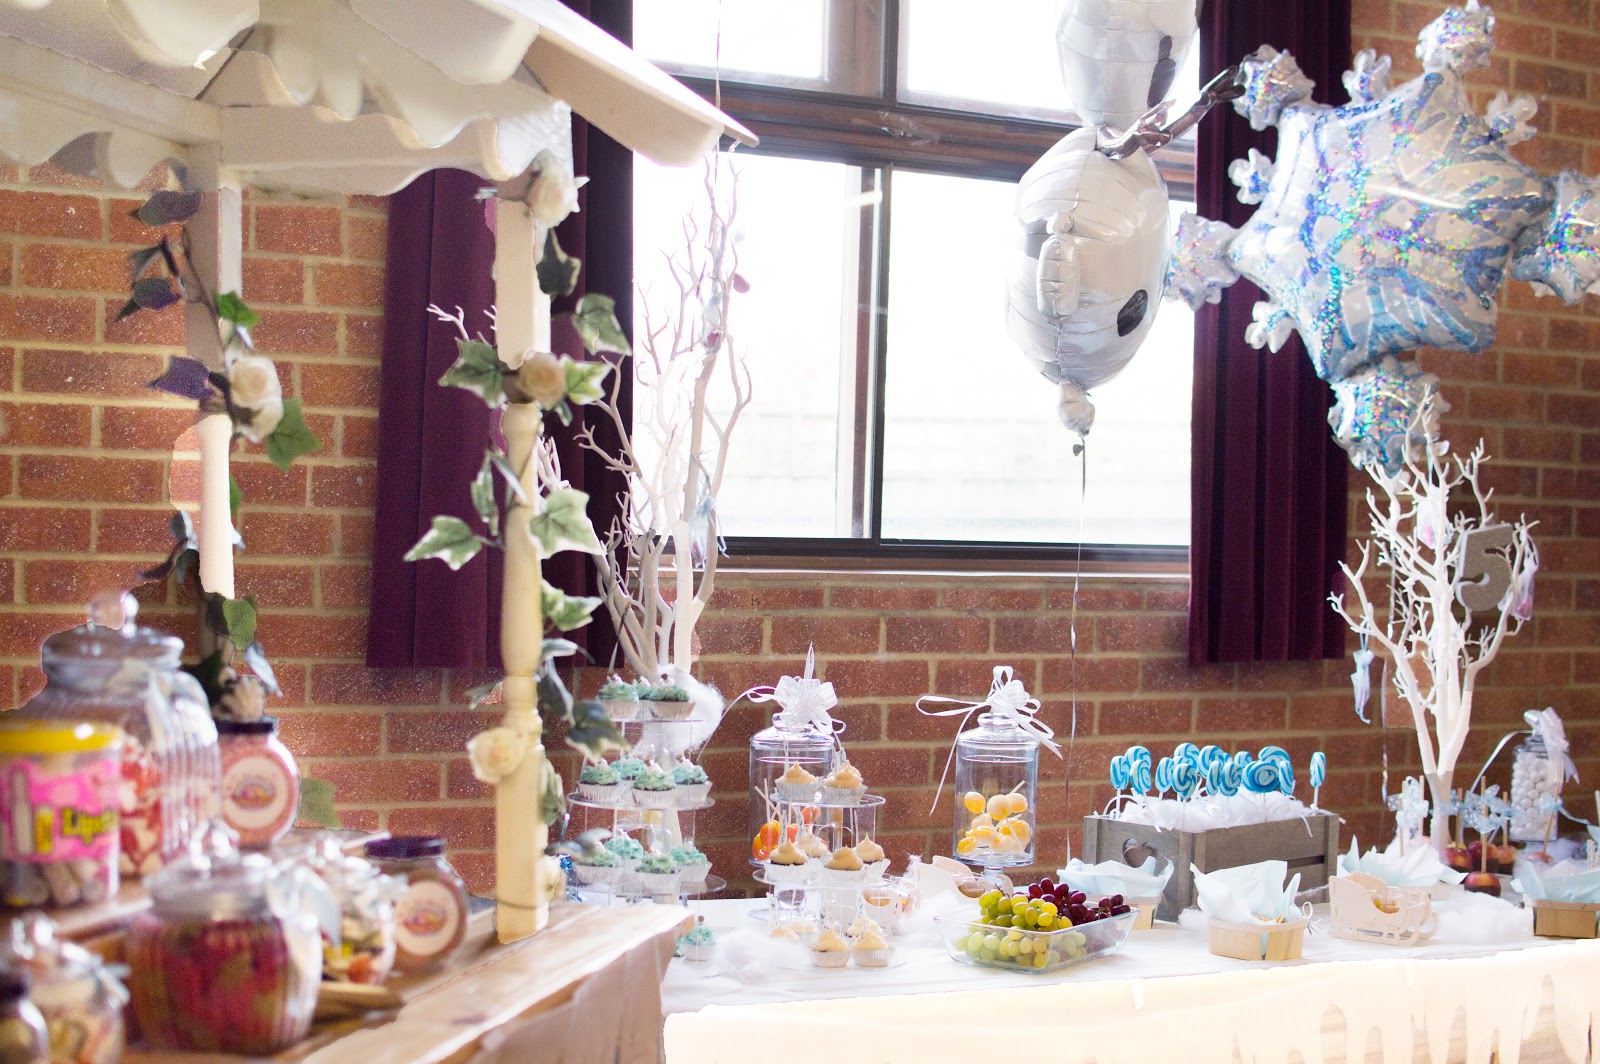 32 Elegant And Funny Frozen Kids' Party Ideas - Shelterness